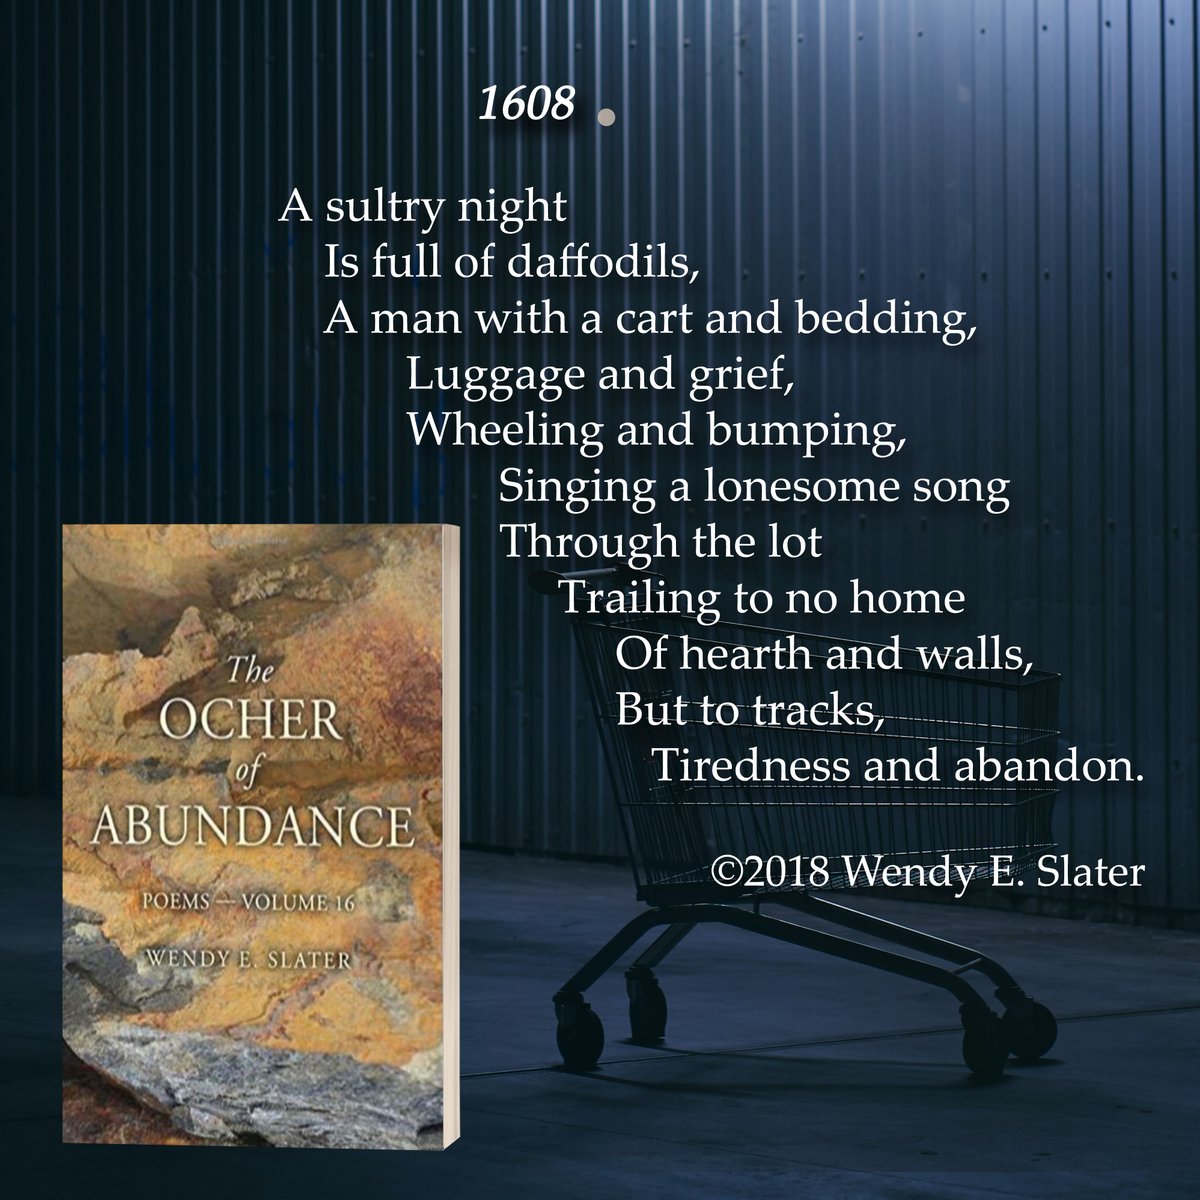 ⭐ ⭐ ⭐ ⭐ ⭐ #Bookreview: 'A poetic journey..a collection that enriches & inspires its readers. It celebrates the human spirit, serves as a beacon of hope, & gently reminds us of the beauty within & around us.' Get your #poetry book here: getbook.at/ocher #Selfcare